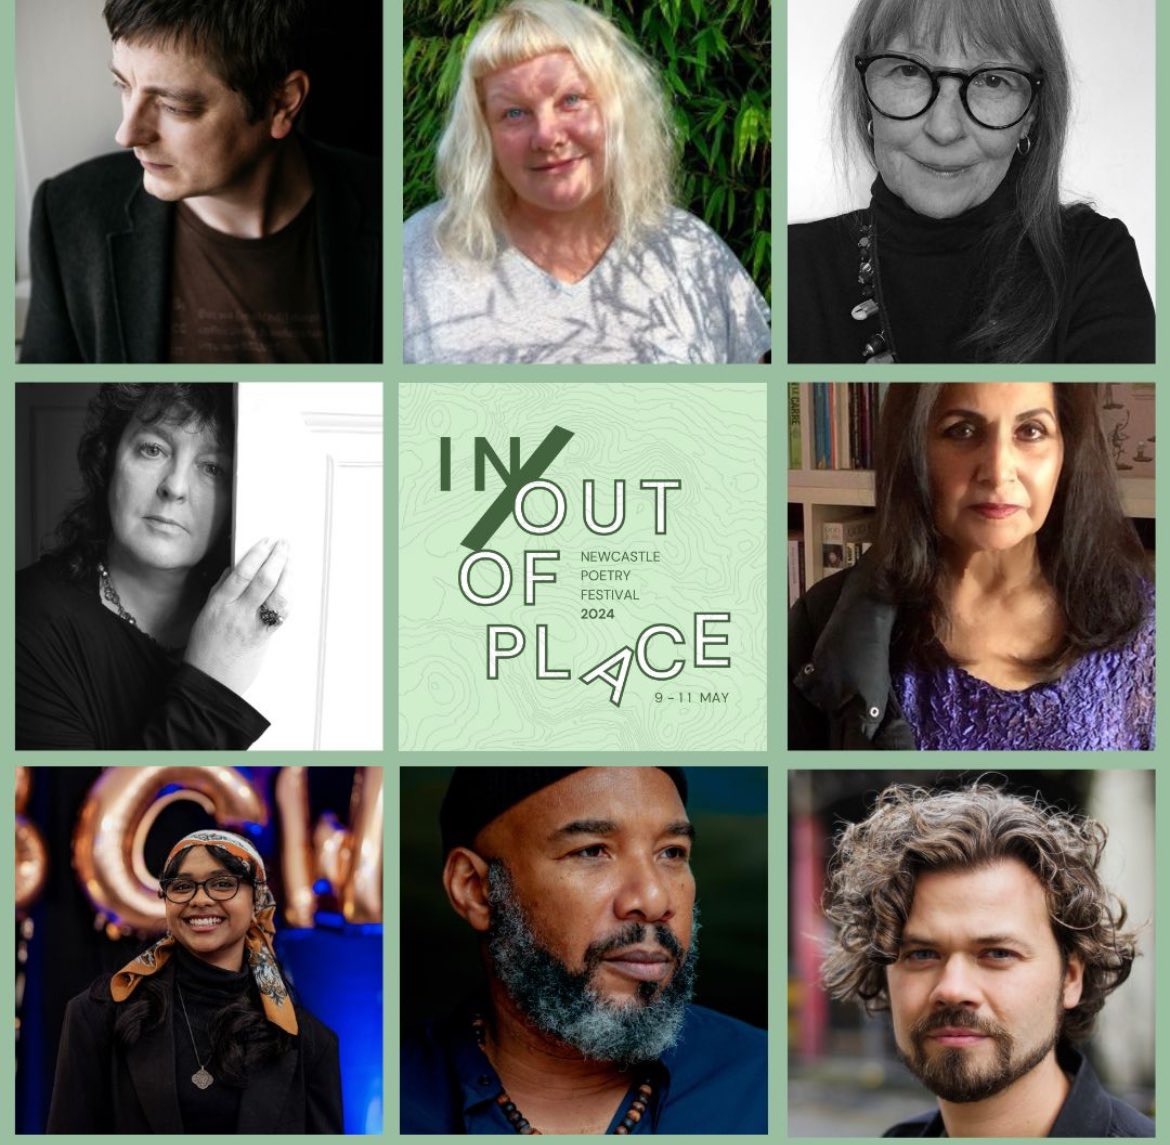 🤓Tickets are on sale for Newcastle Poetry Festival 2024! #NPFP24 📚Please join us for 3 days of readings, panels, workshops, commissions, performances and school events 9-11 May @northernstage @UniofNewcastle Booking info here 🎫newcastlepoetryfestival.co.uk